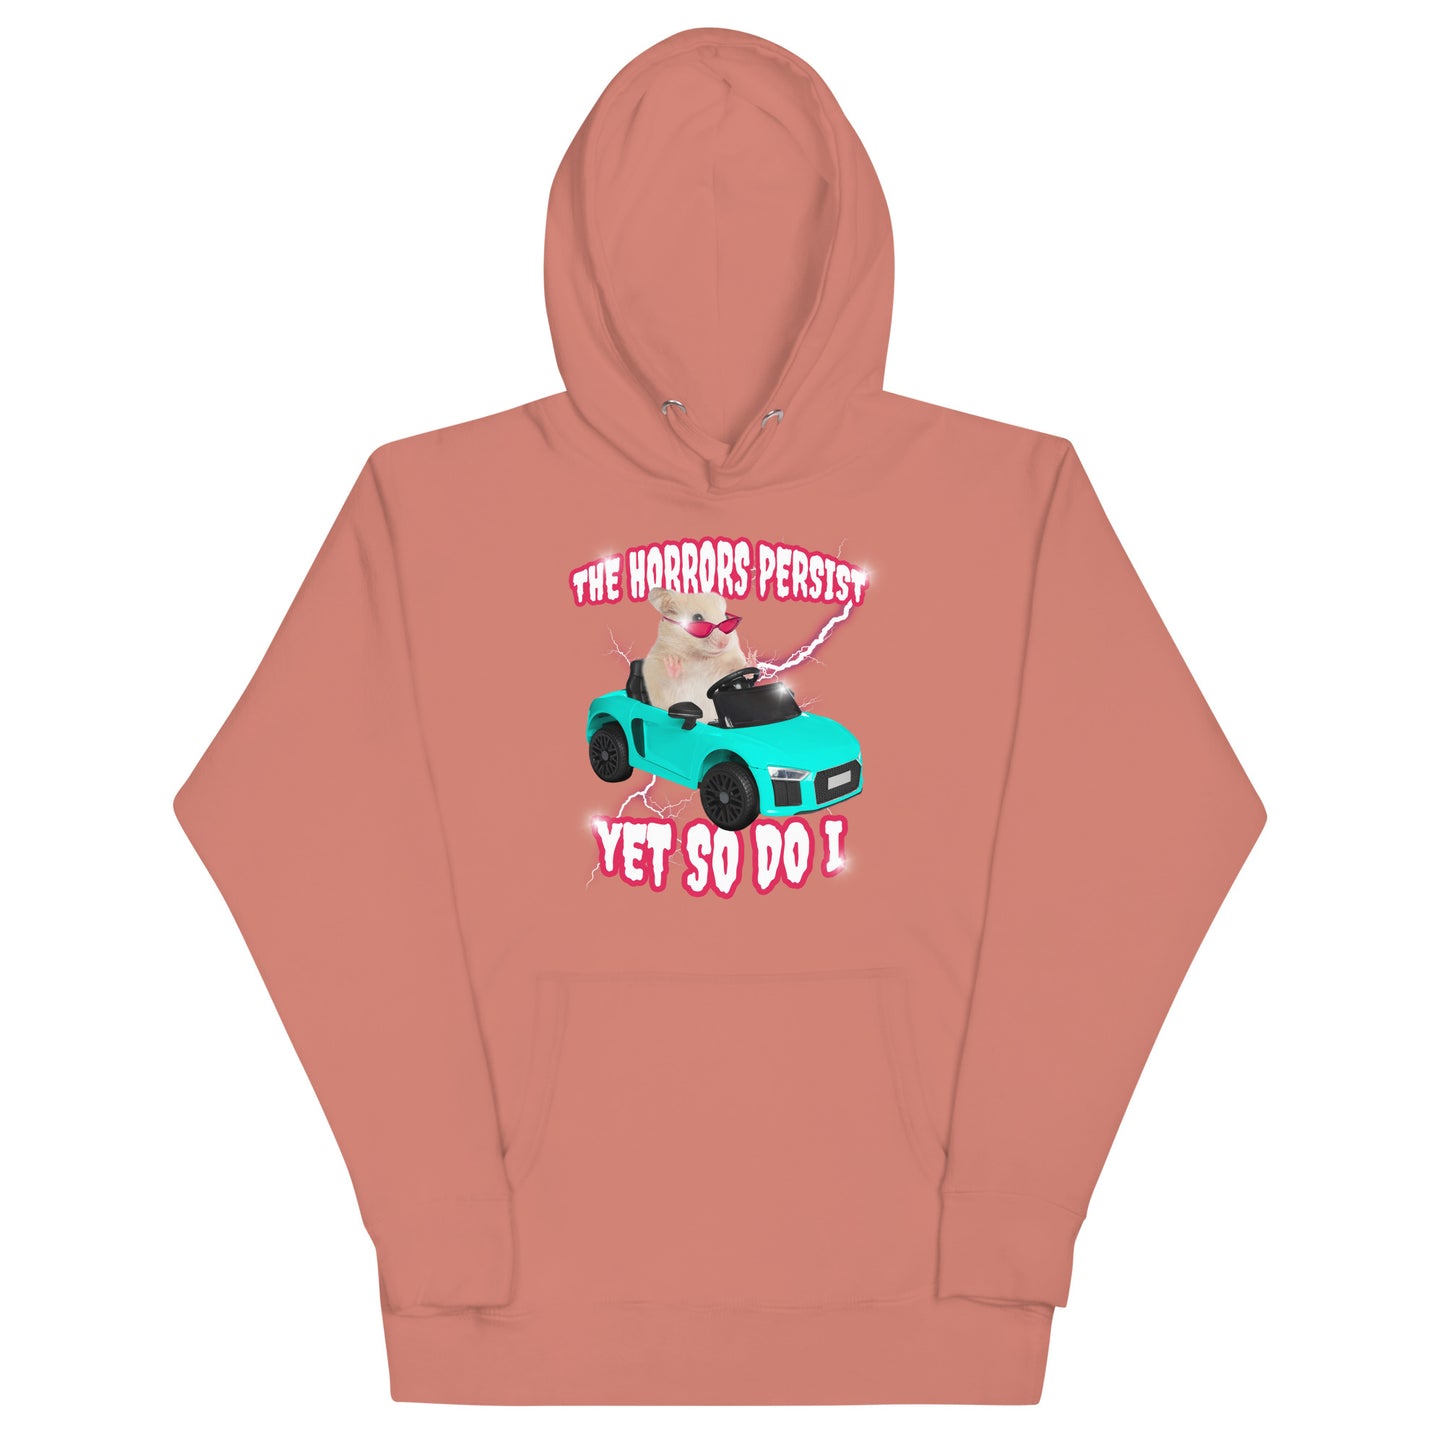 The Horrors Persist Yet So Do I Unisex Hoodie